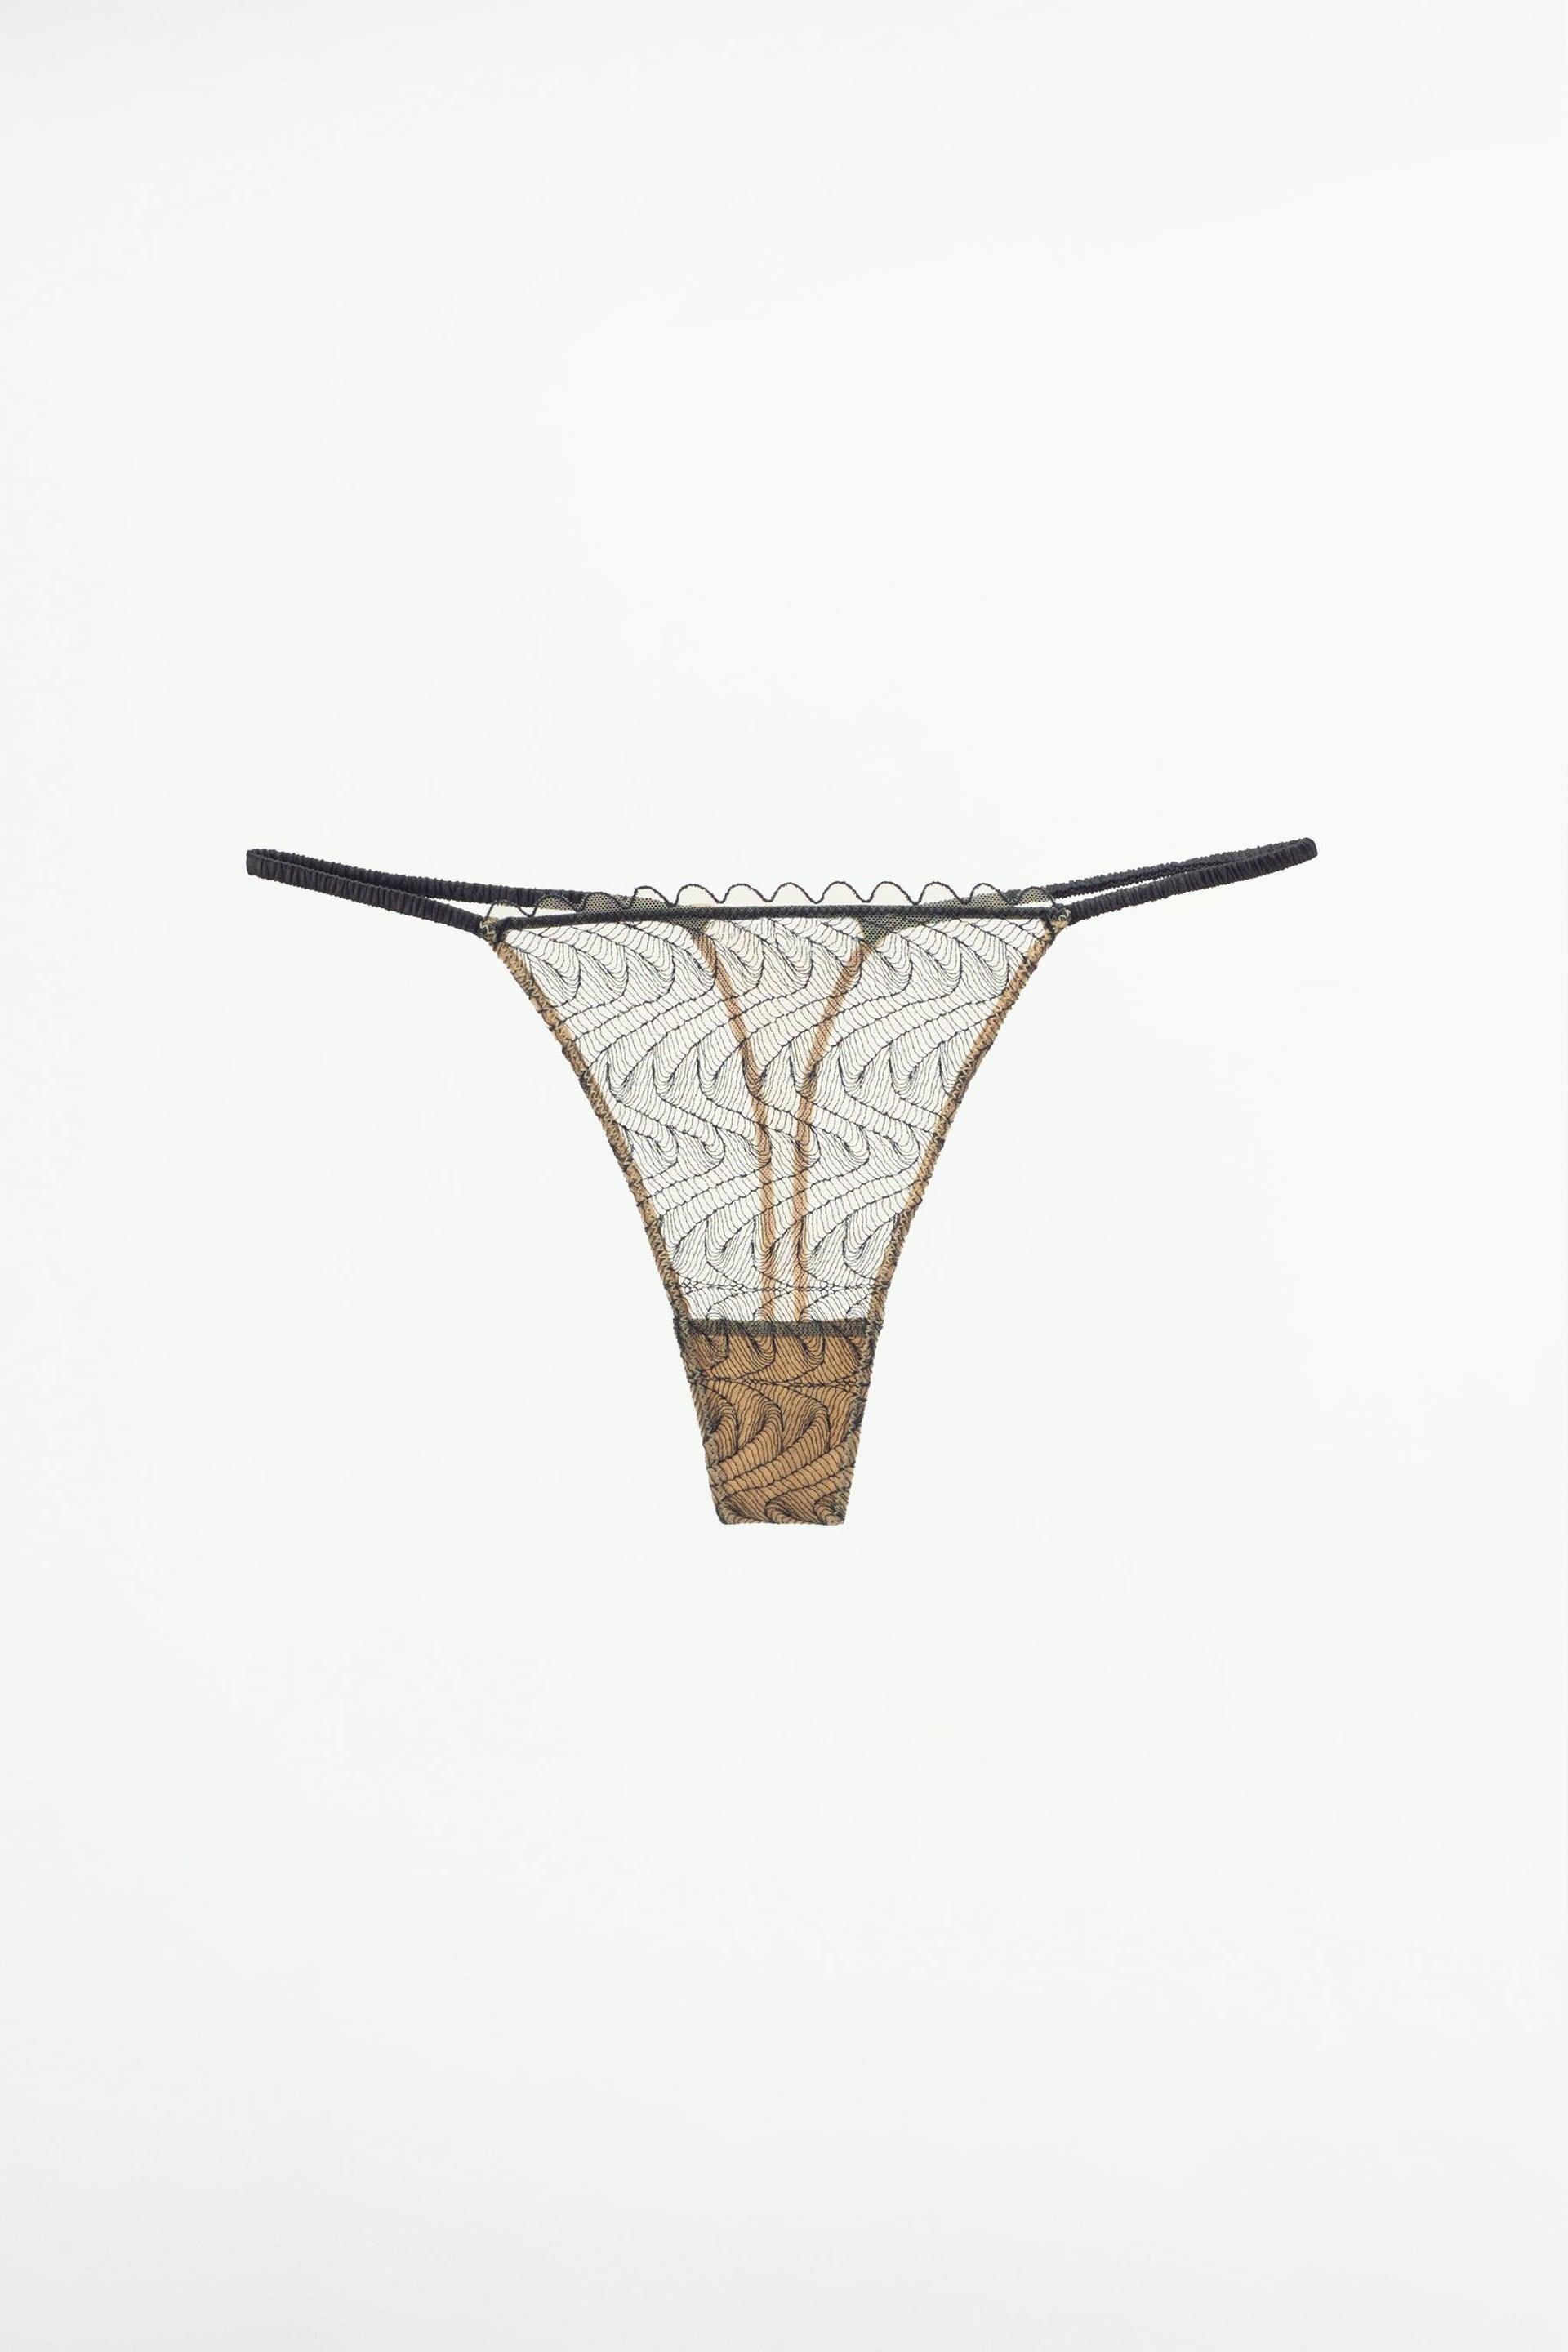 LACE EMBROIDERY THONG by ZARA